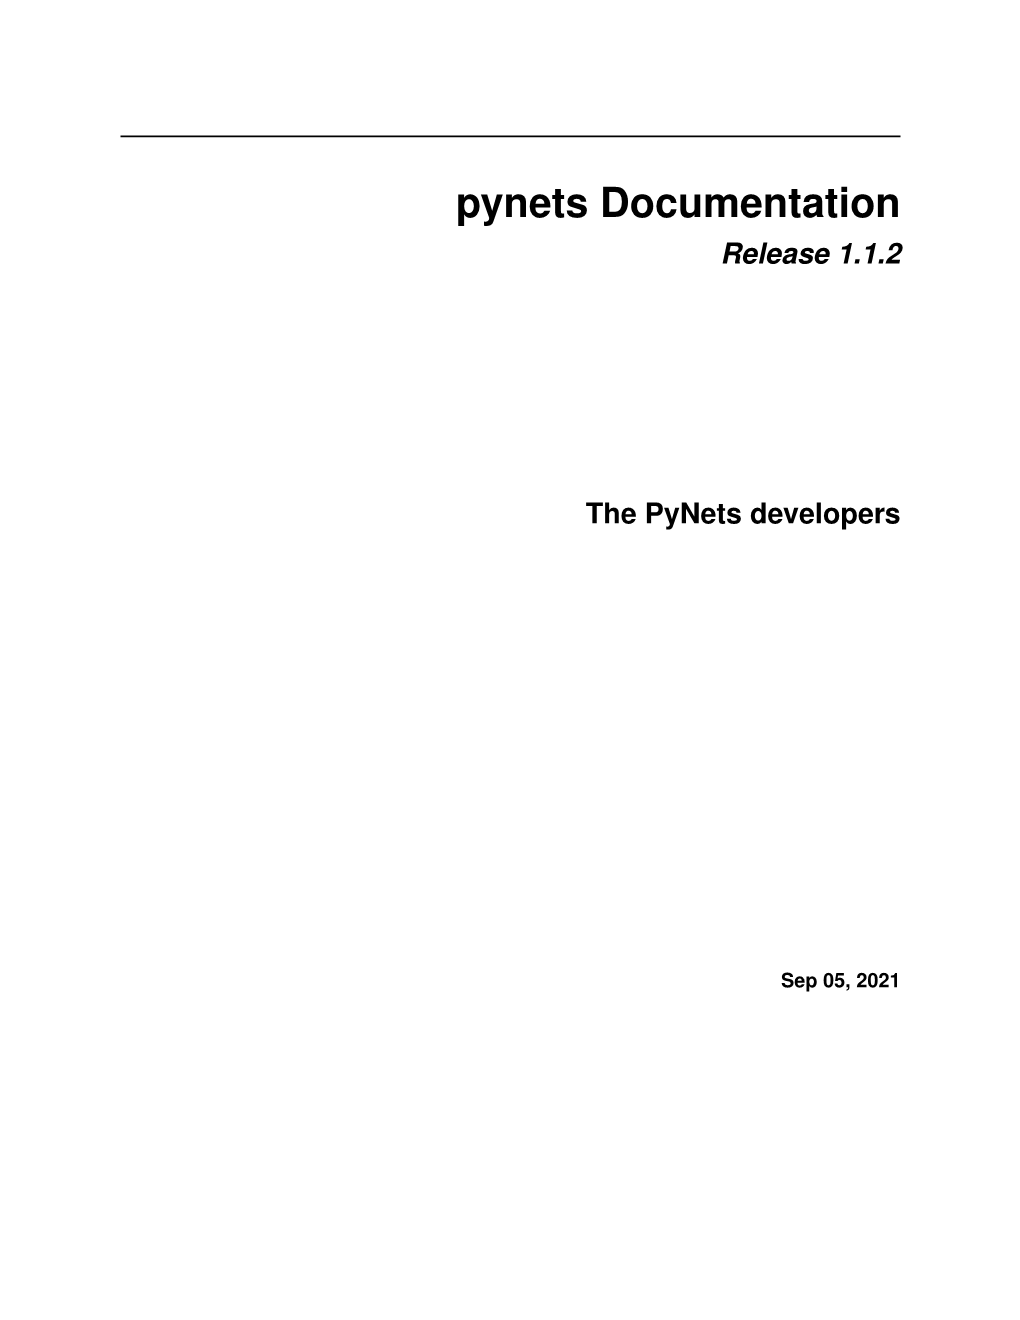 Pynets Documentation Release 1.1.2